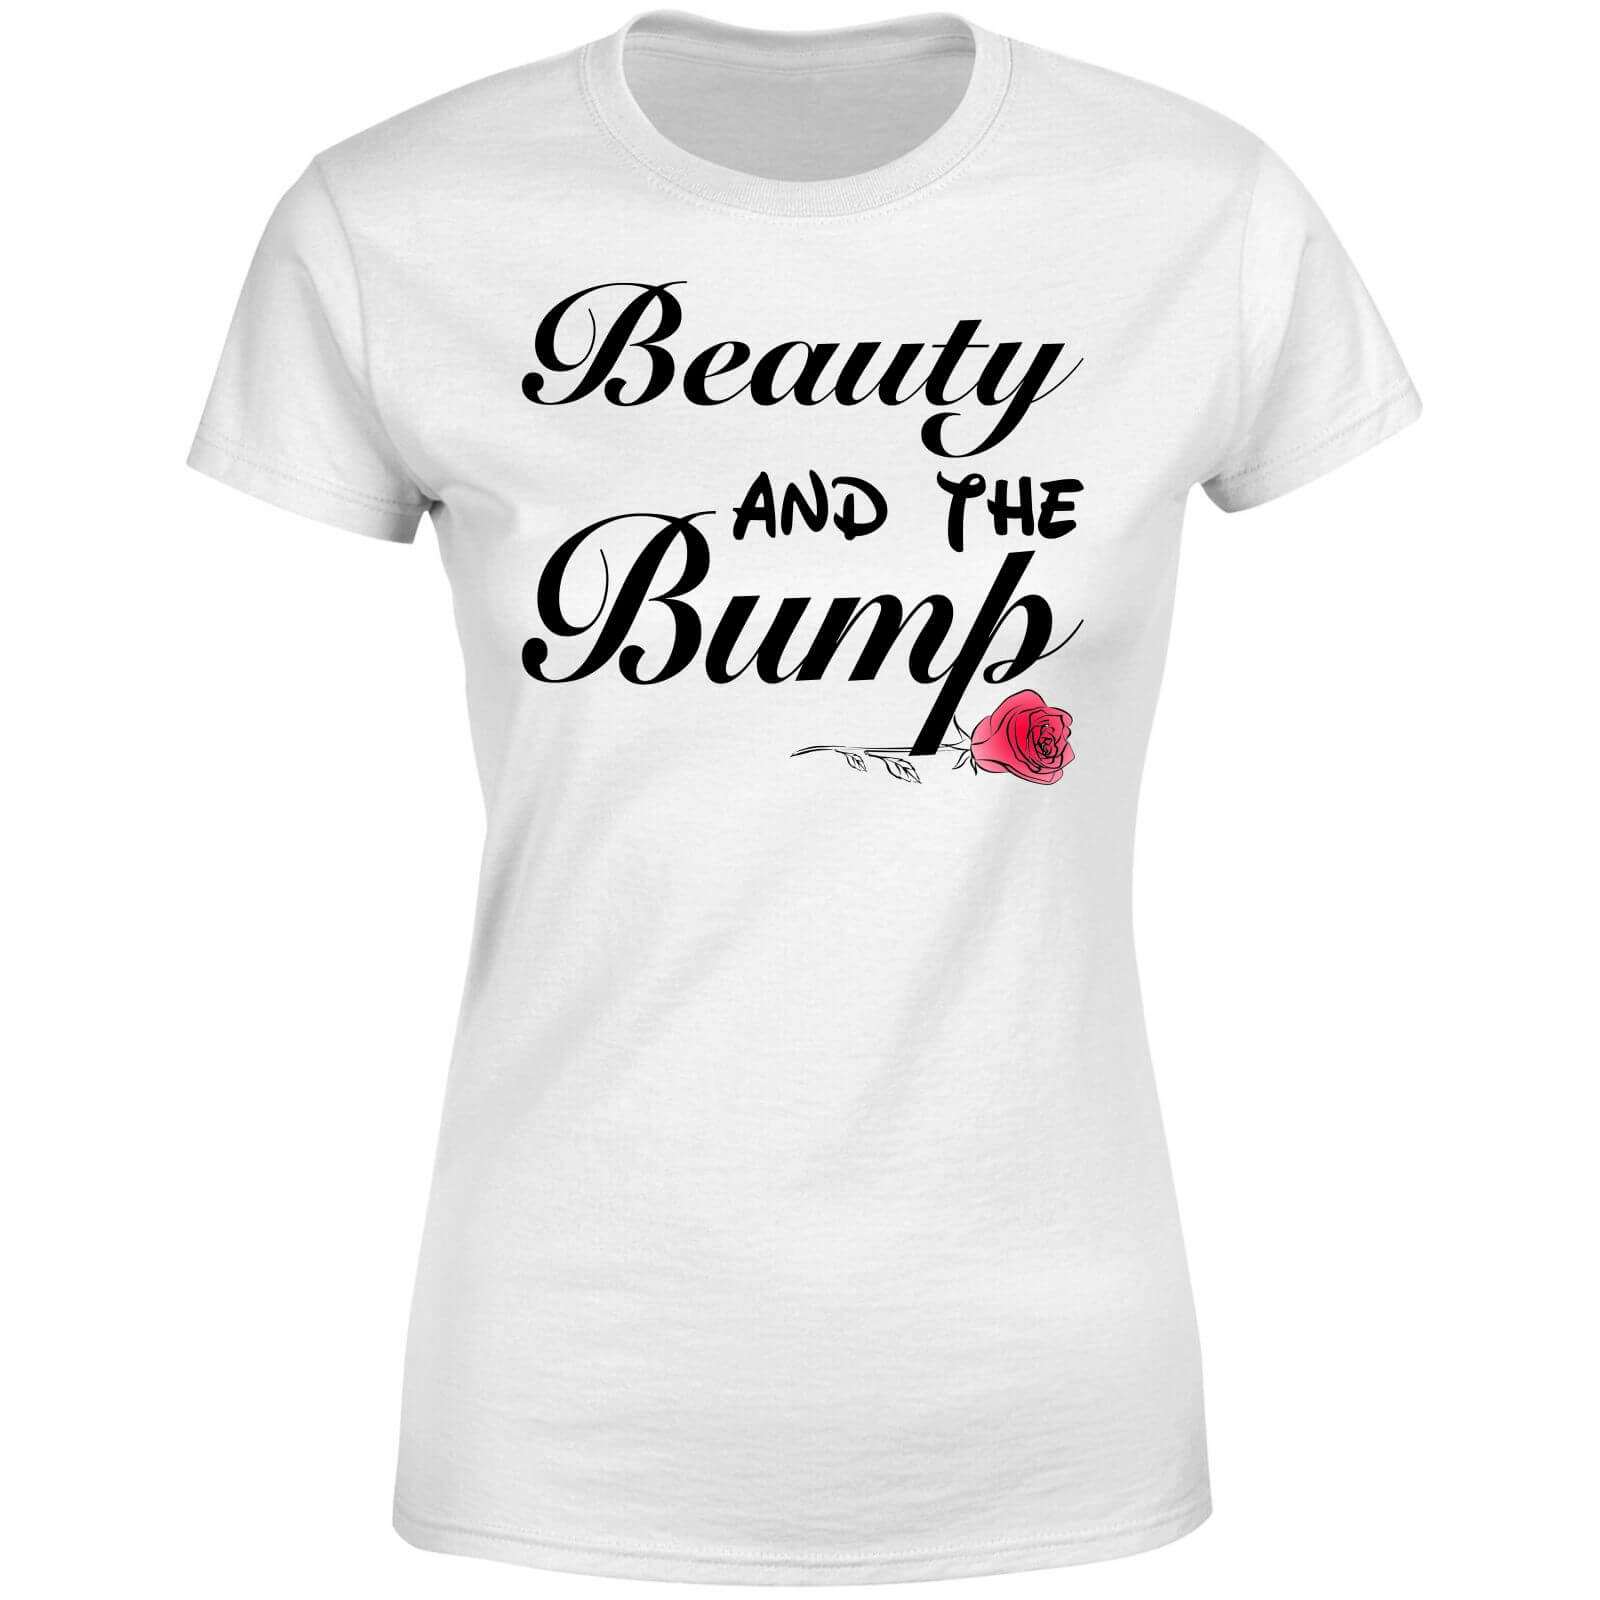 Be My Pretty Beauty and The Bump Women's T-Shirt - White - 4XL - White